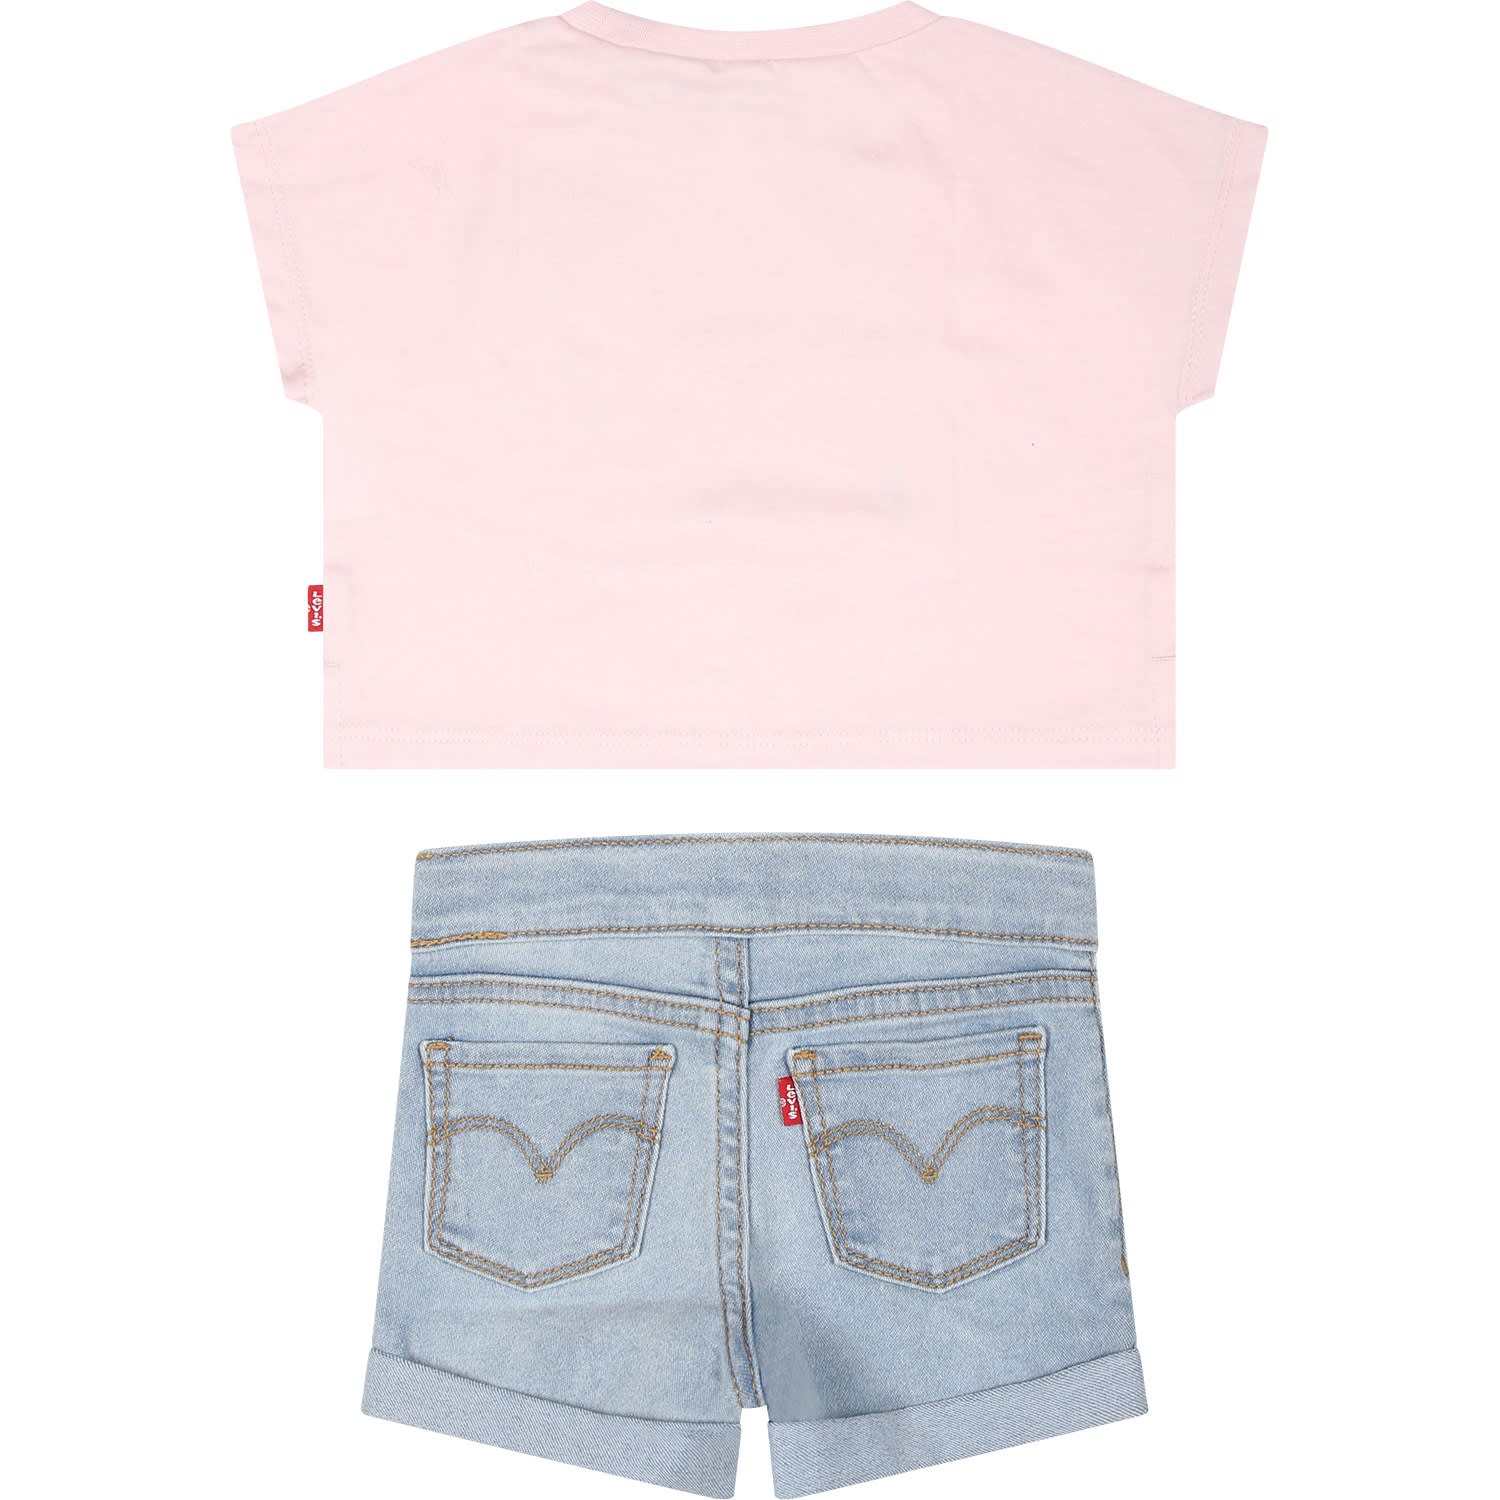 Shop Levi's Pink Suit For Baby Girl With Flower Print In Multicolor